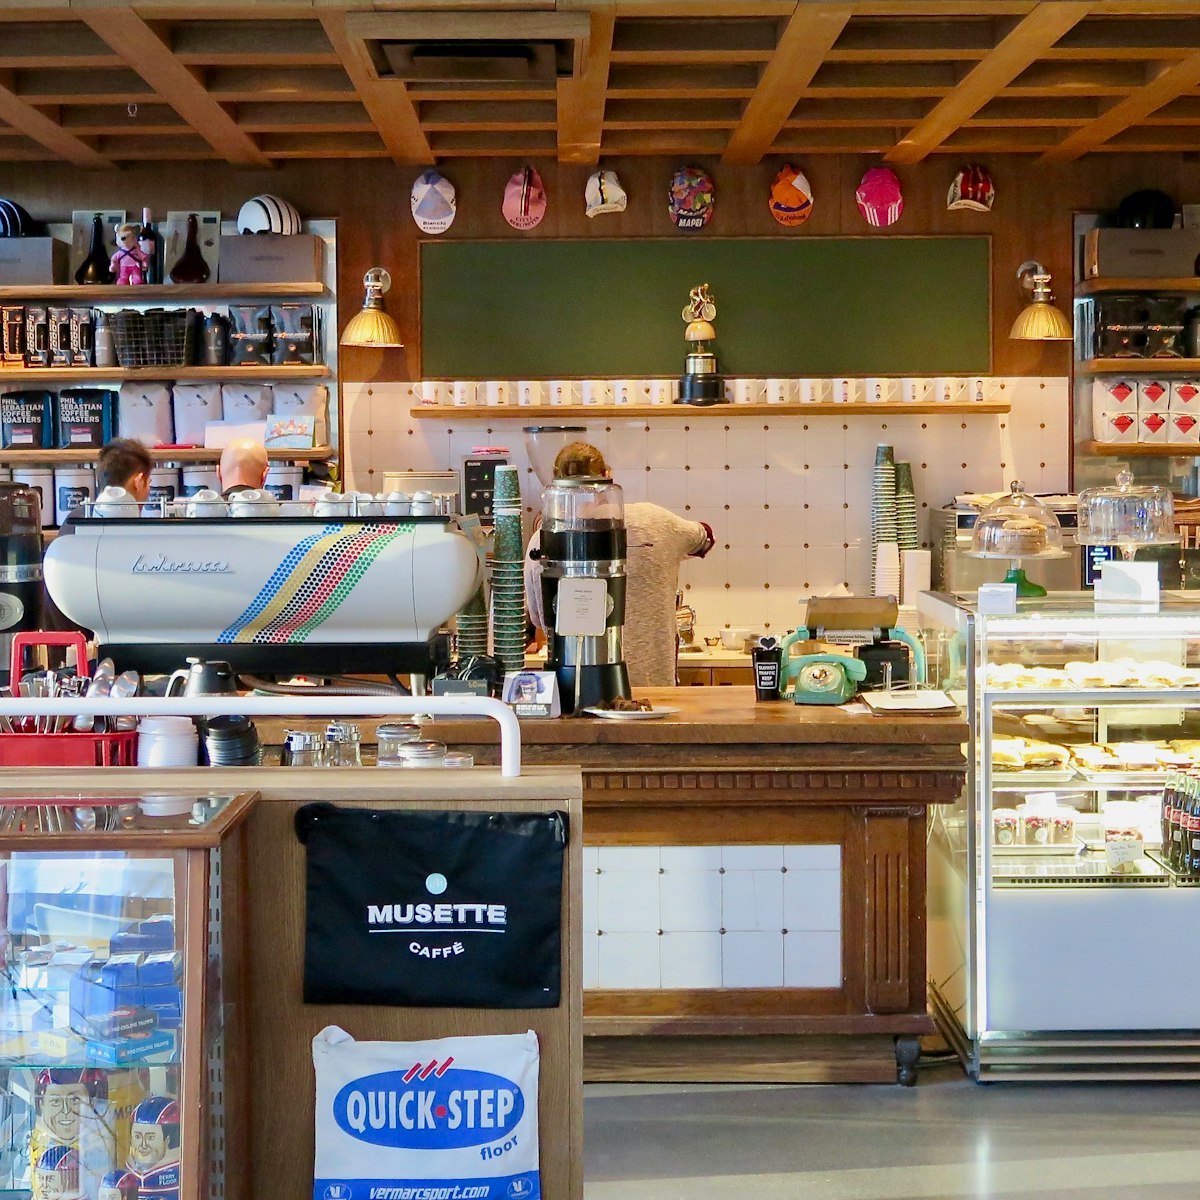 Musetts Caffe is an invitng spot with plenty of fuel-up options